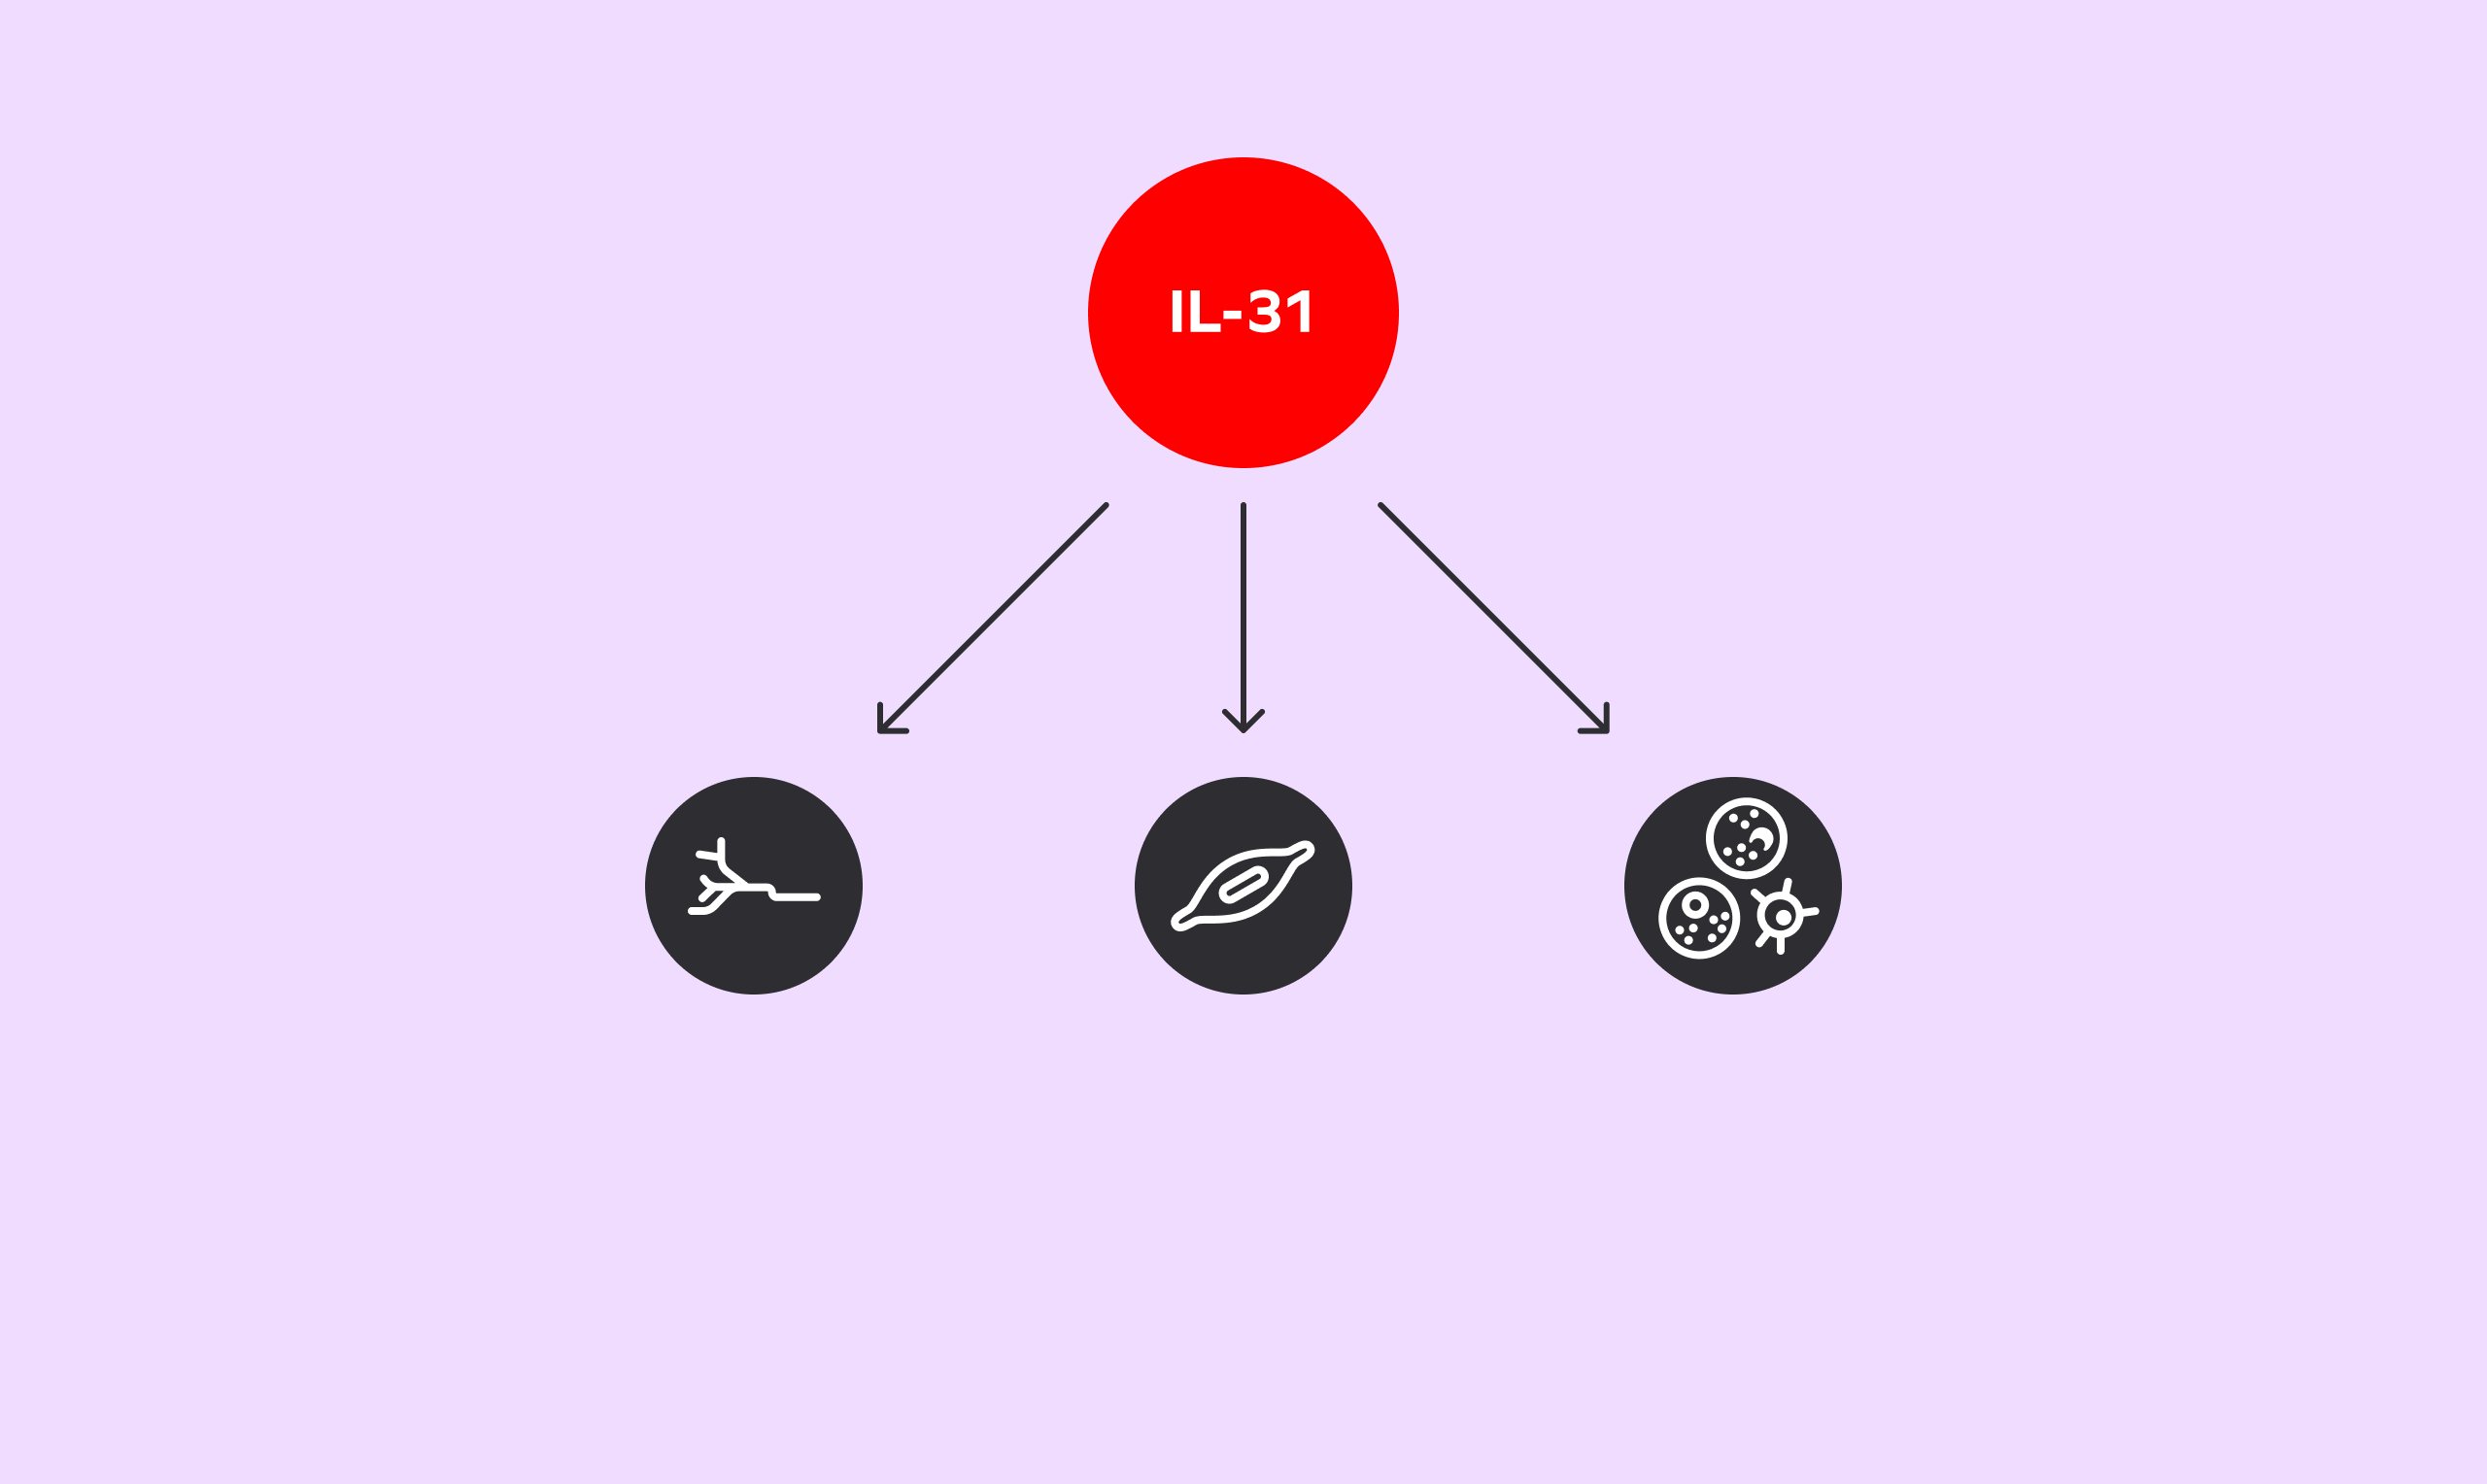 A red circle labeled "IL-31." Three arrows extend from the circle, pointing to 3 more icons below it.